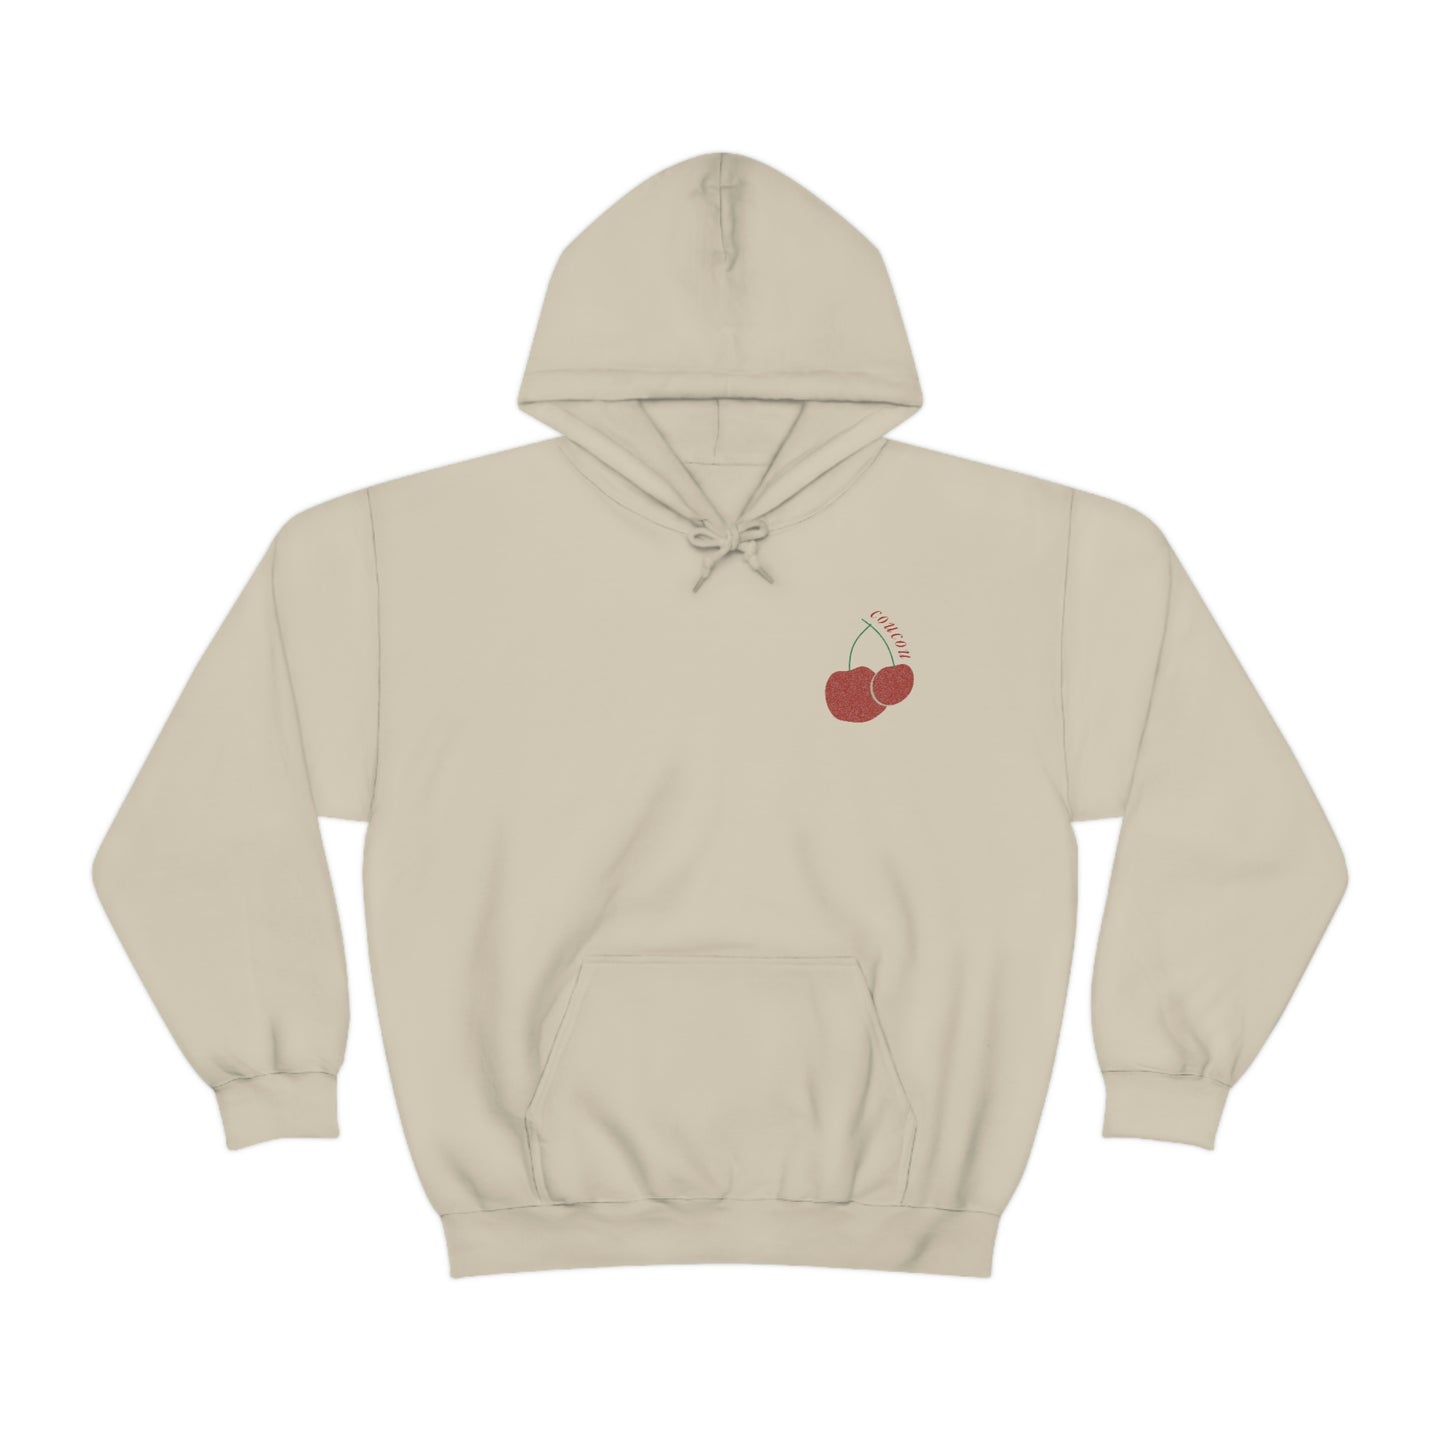 Cou Cou Voicemail Hooded Sweatshirt